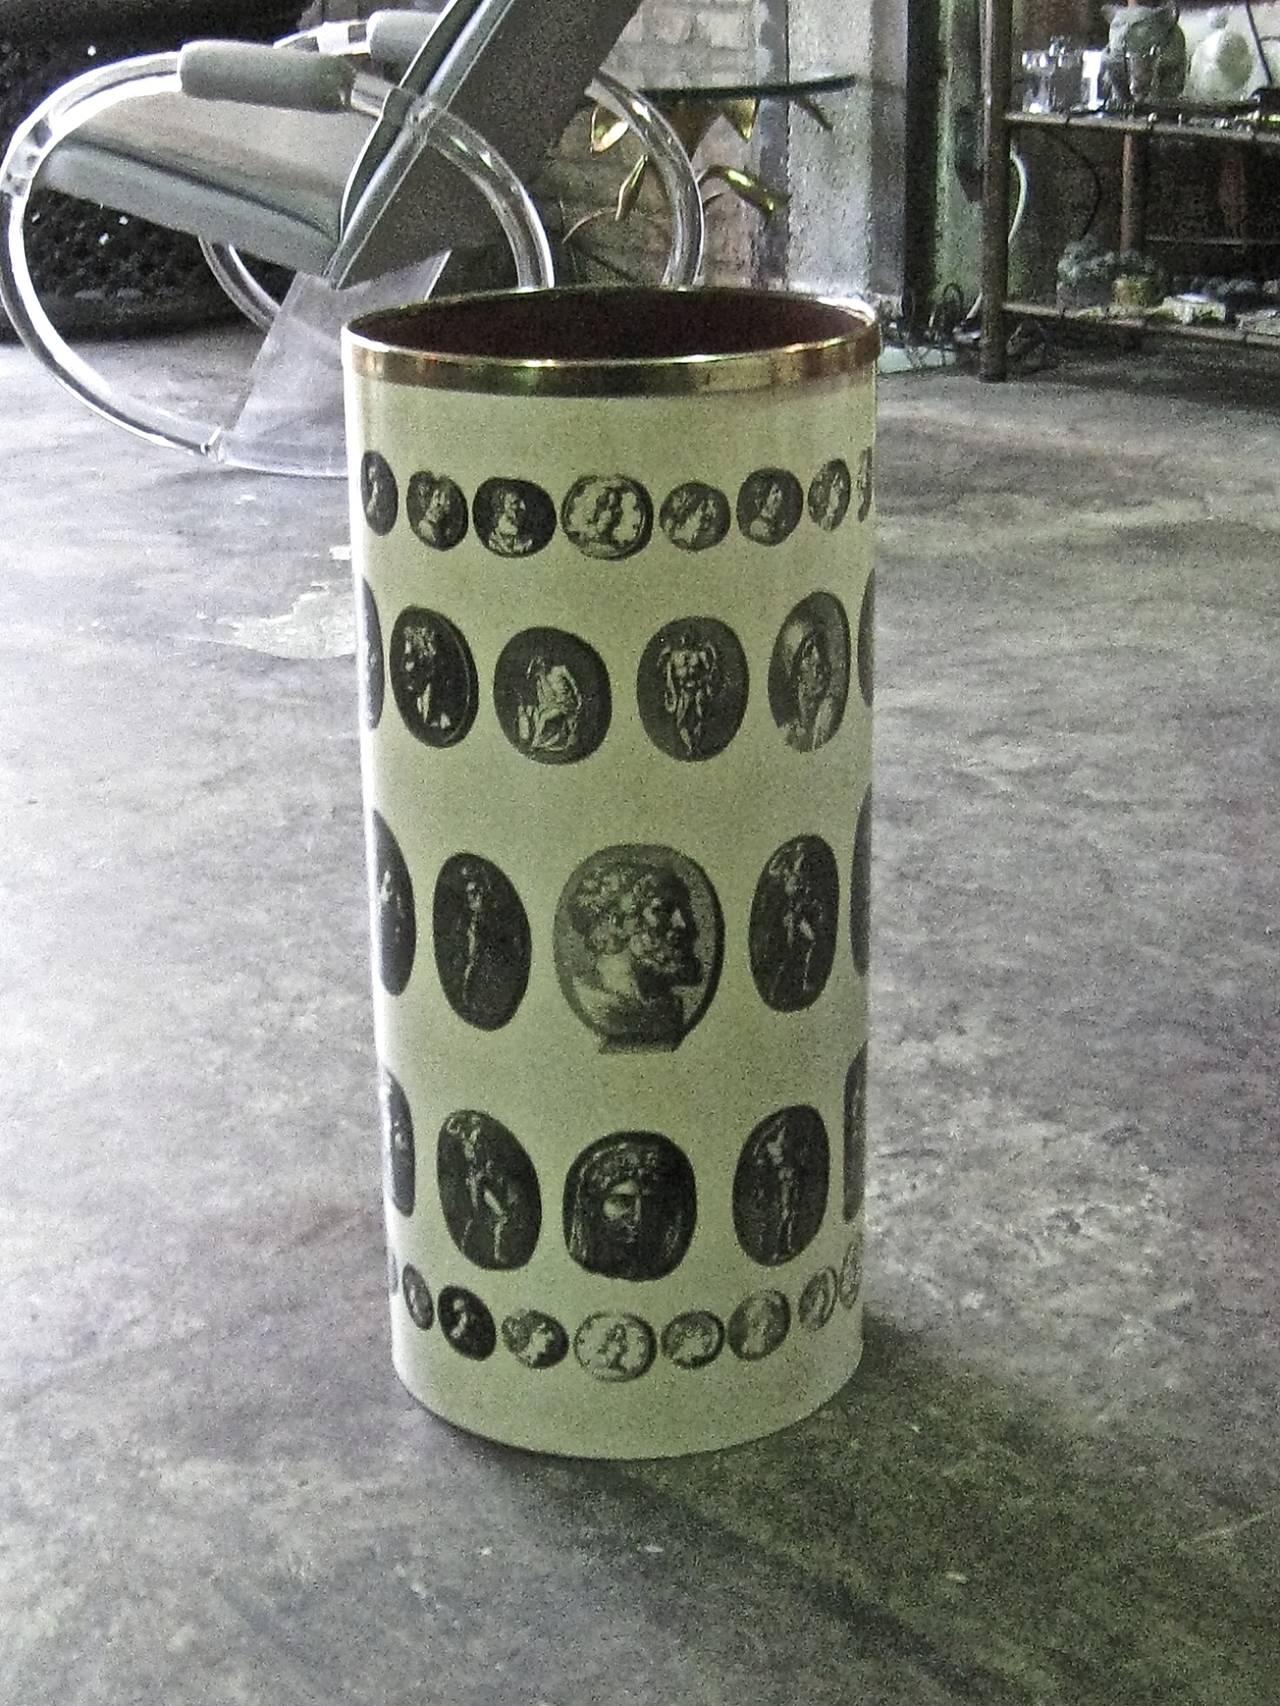 A 1950's metal umbrella stand having a lithographed pattern of neoclassical figures designed by Piero Fornasetti. Original label on underside and interior stamp.